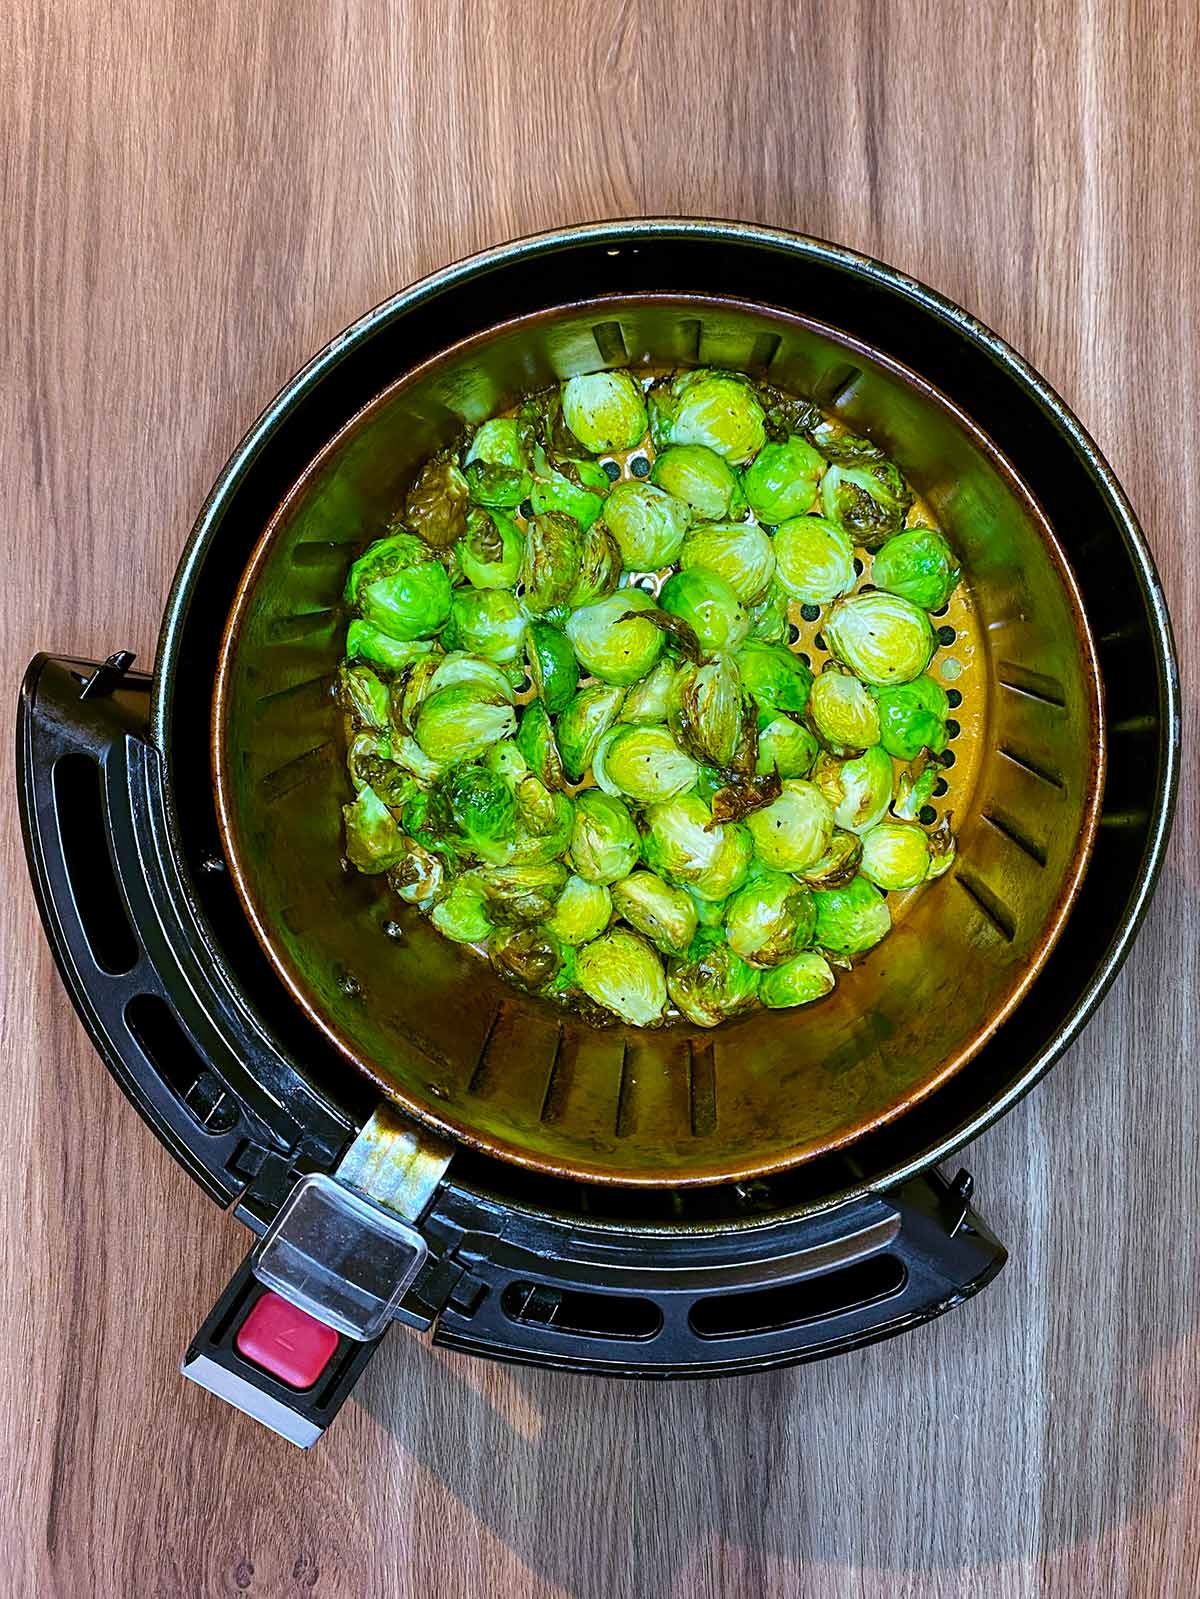 Cooked Brussels sprouts in an air fryer basket.